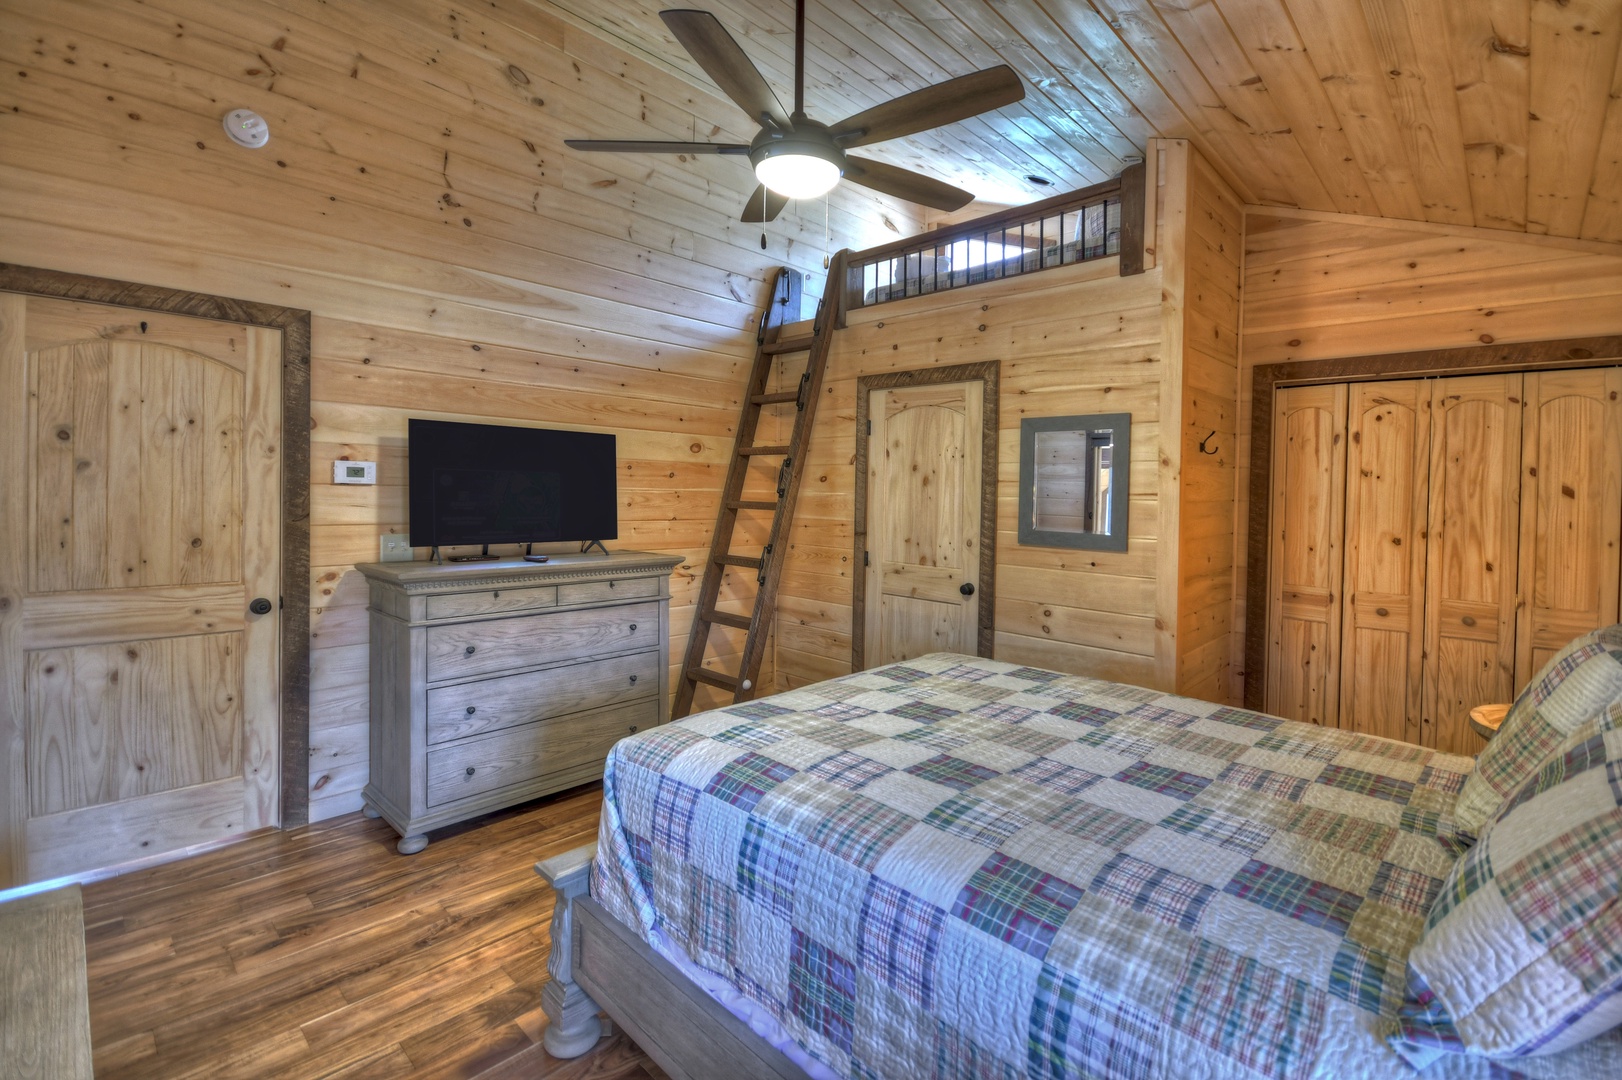 Whisky Creek Retreat- Upper queen bedroom with a TV and loft area